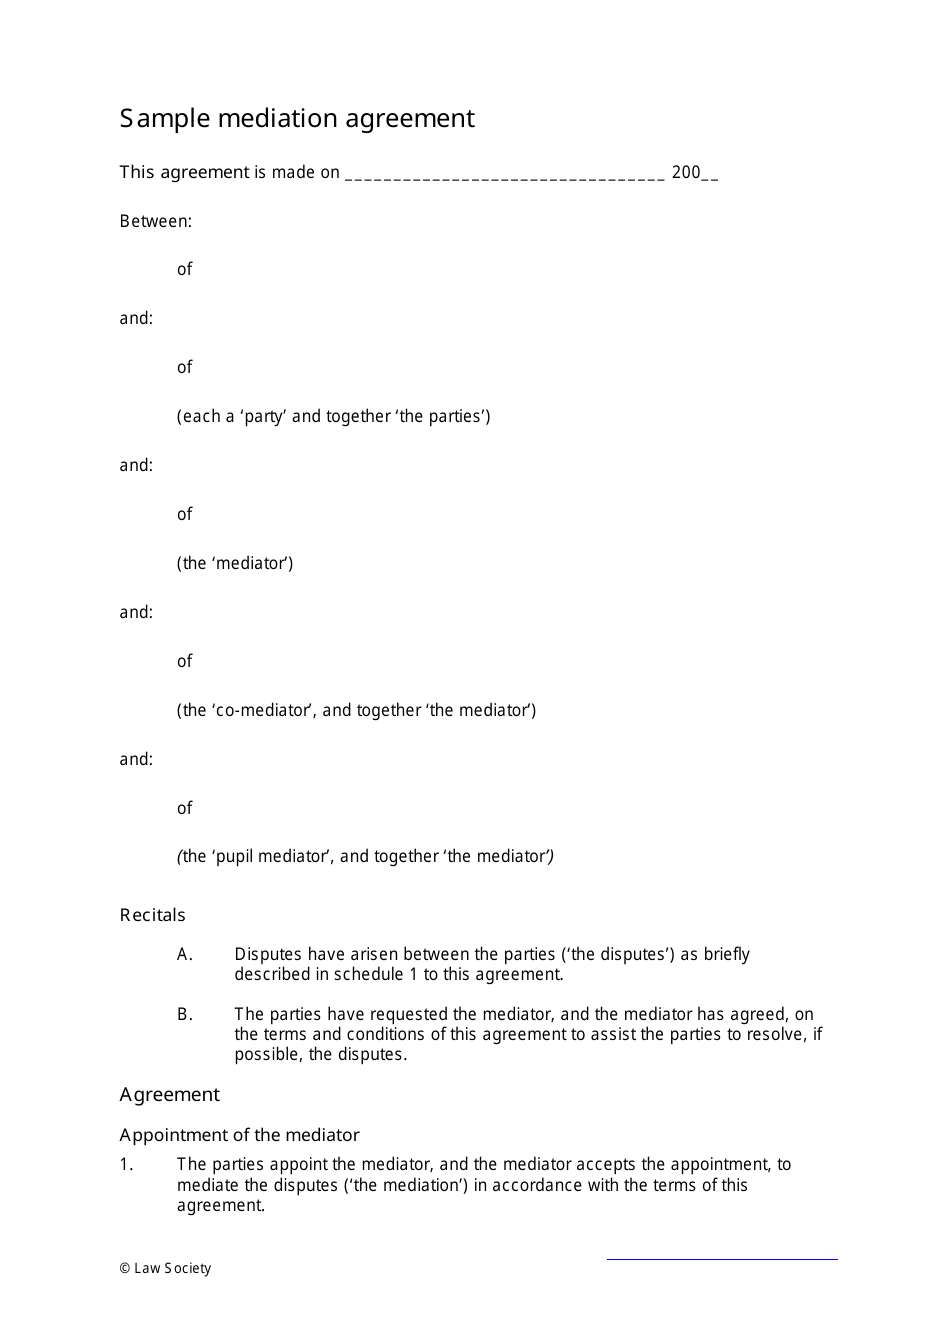 Sample Mediation Agreement Template, Page 1